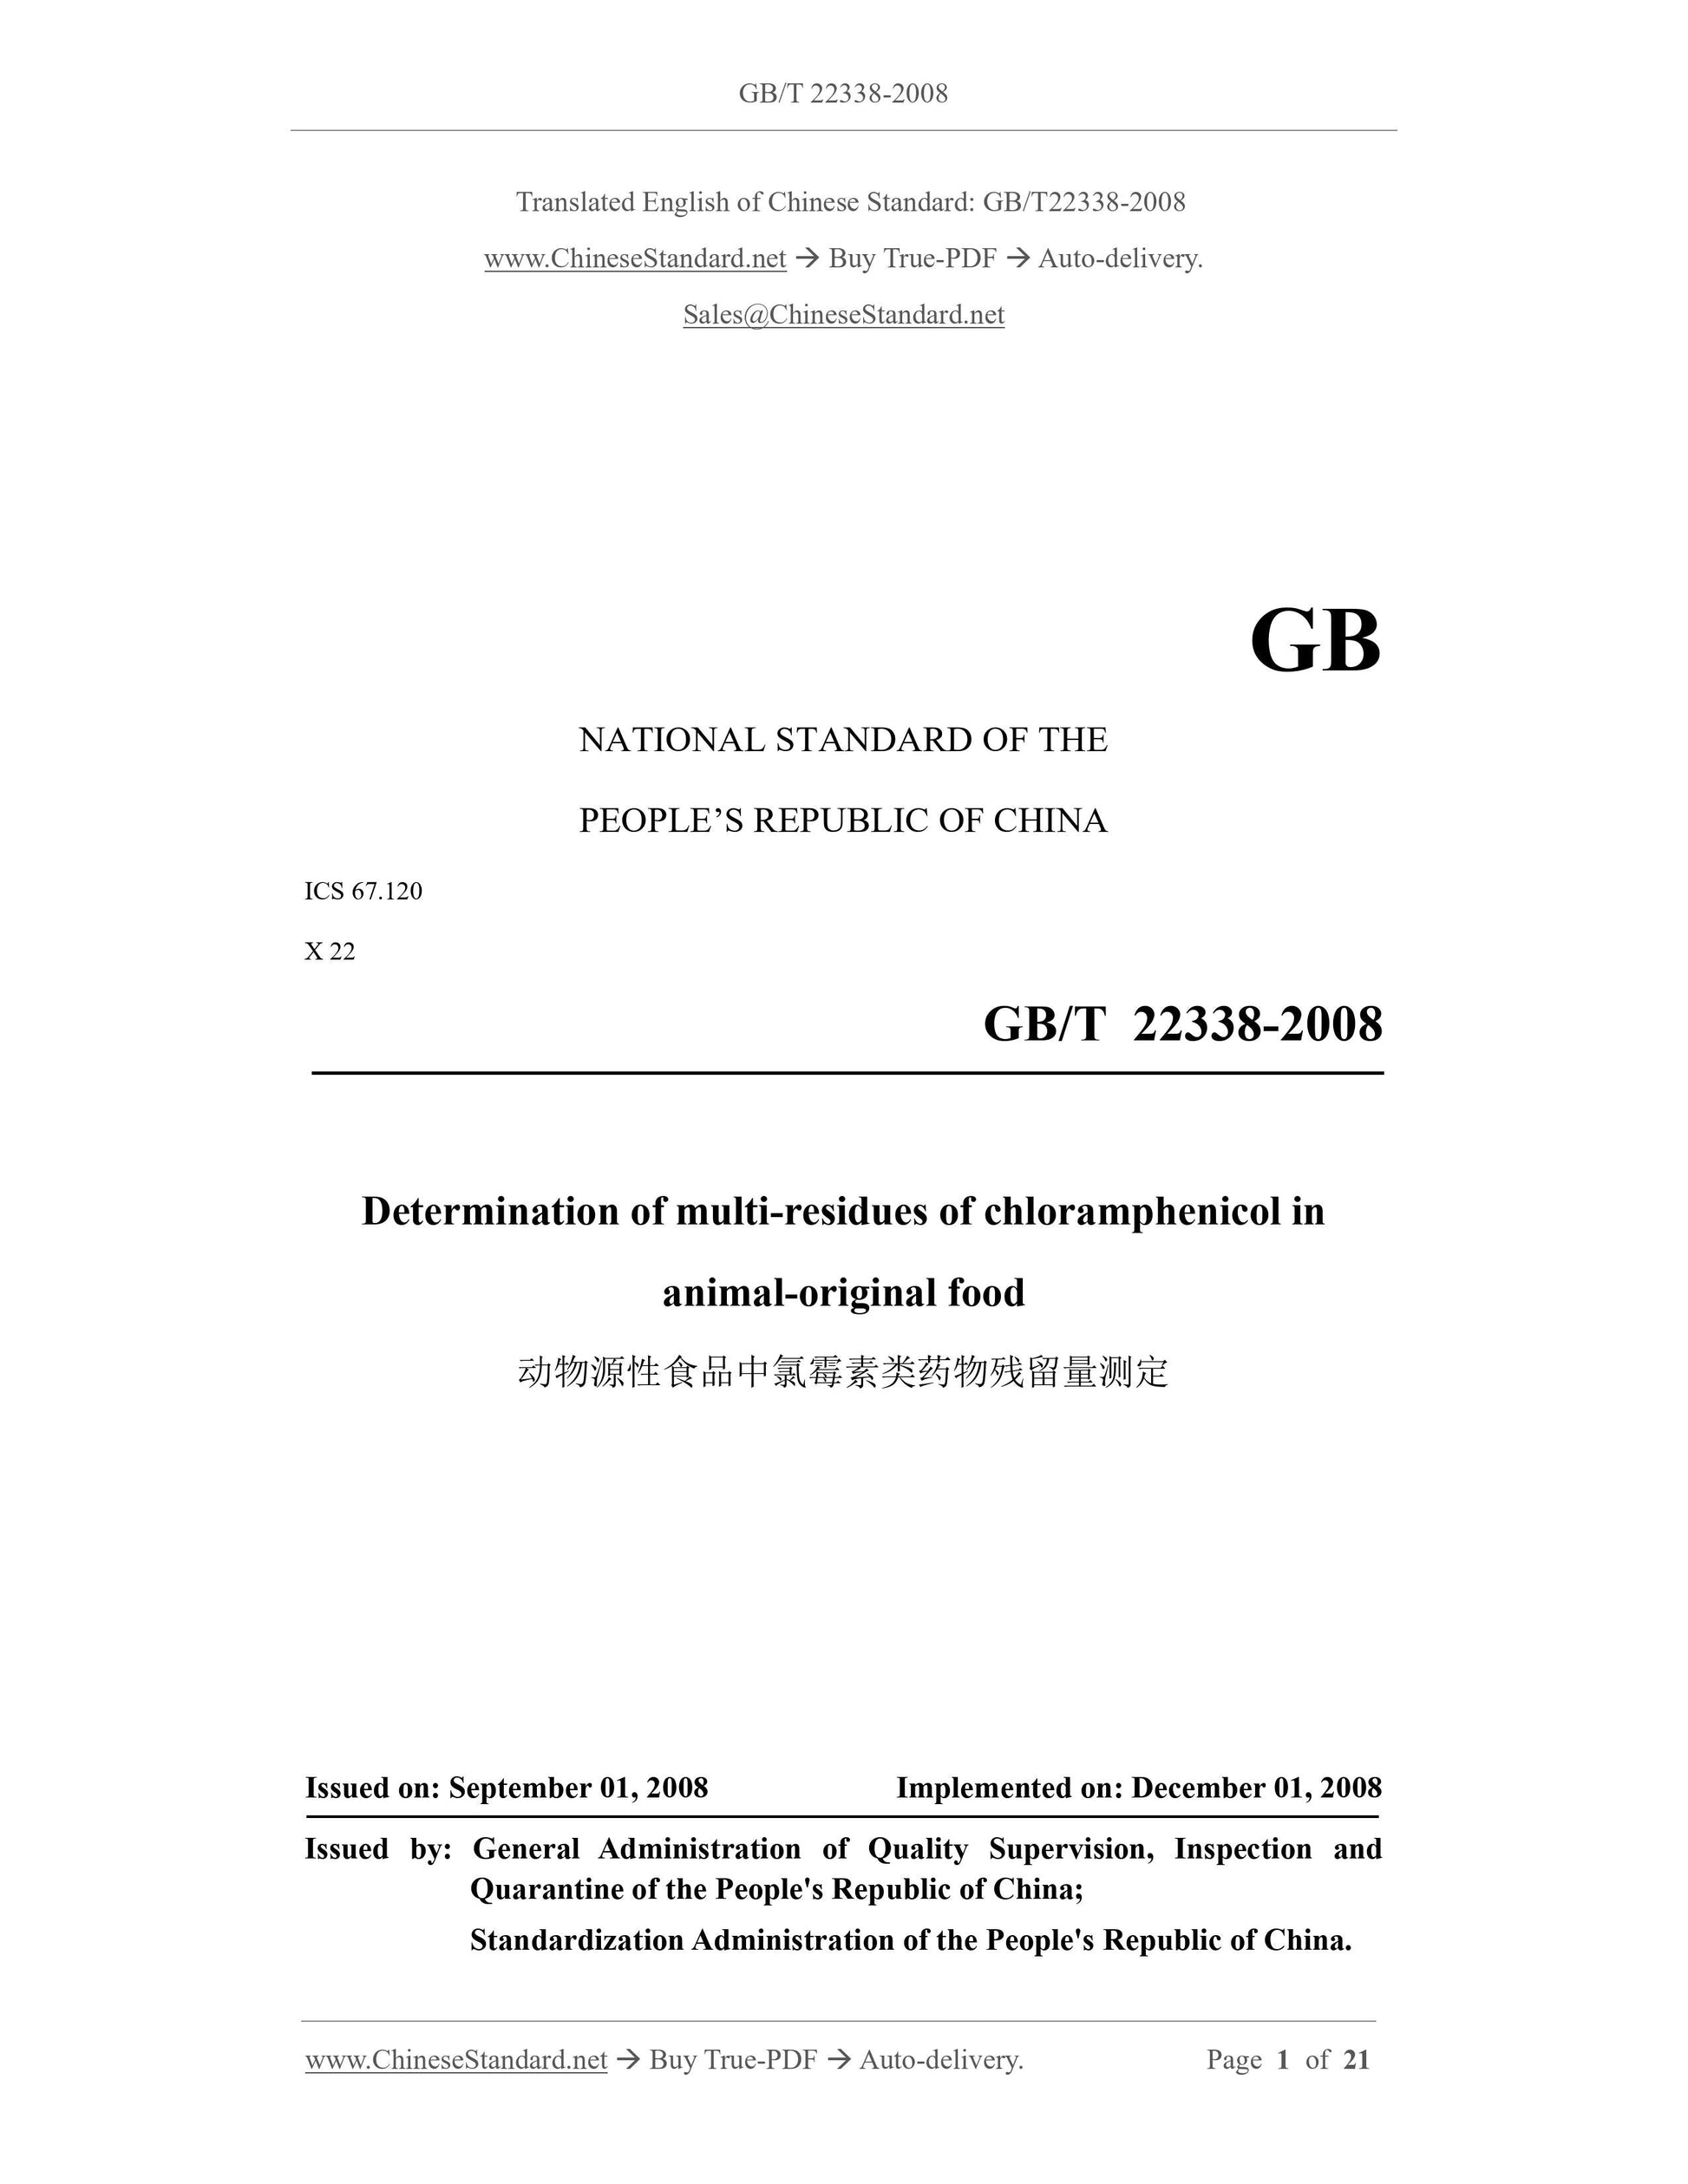 GB/T 22338-2008 Page 1